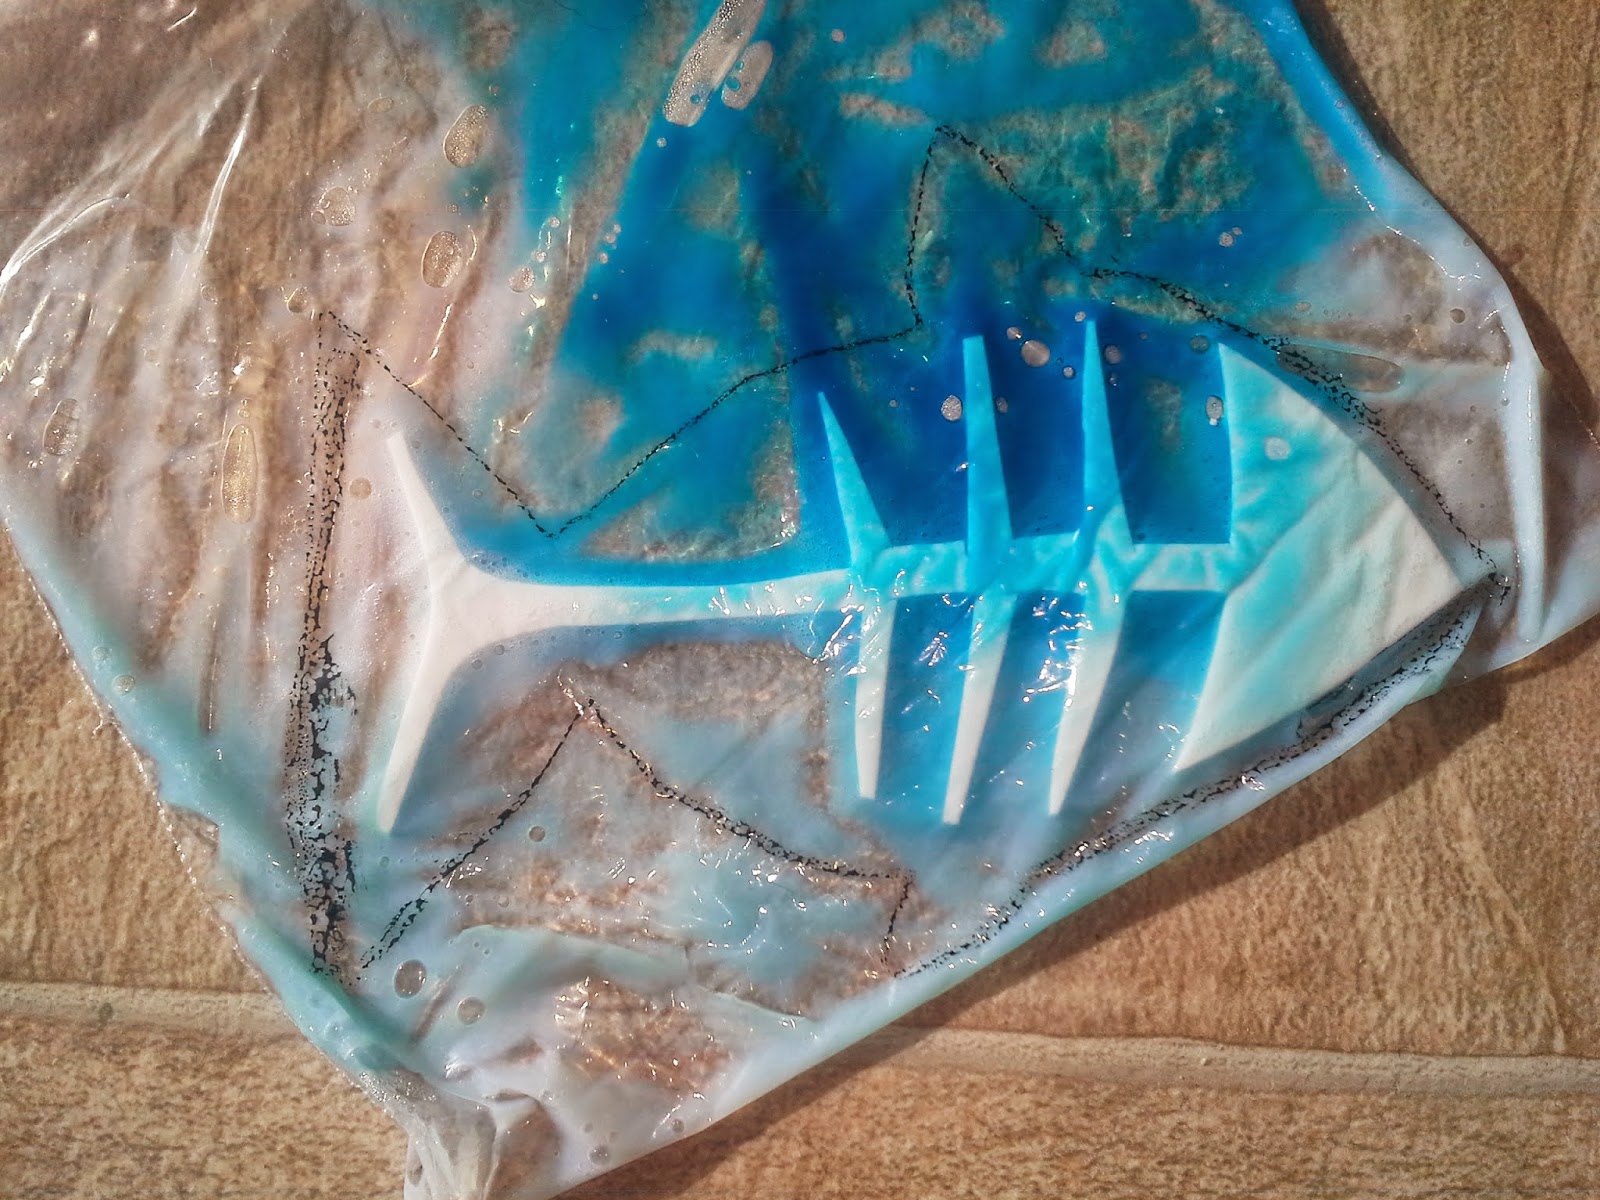 X-ray activity: using white foam for the skeleton, you then add food dye and glue to a bag, and cut out the shape of a fish around the skeleton